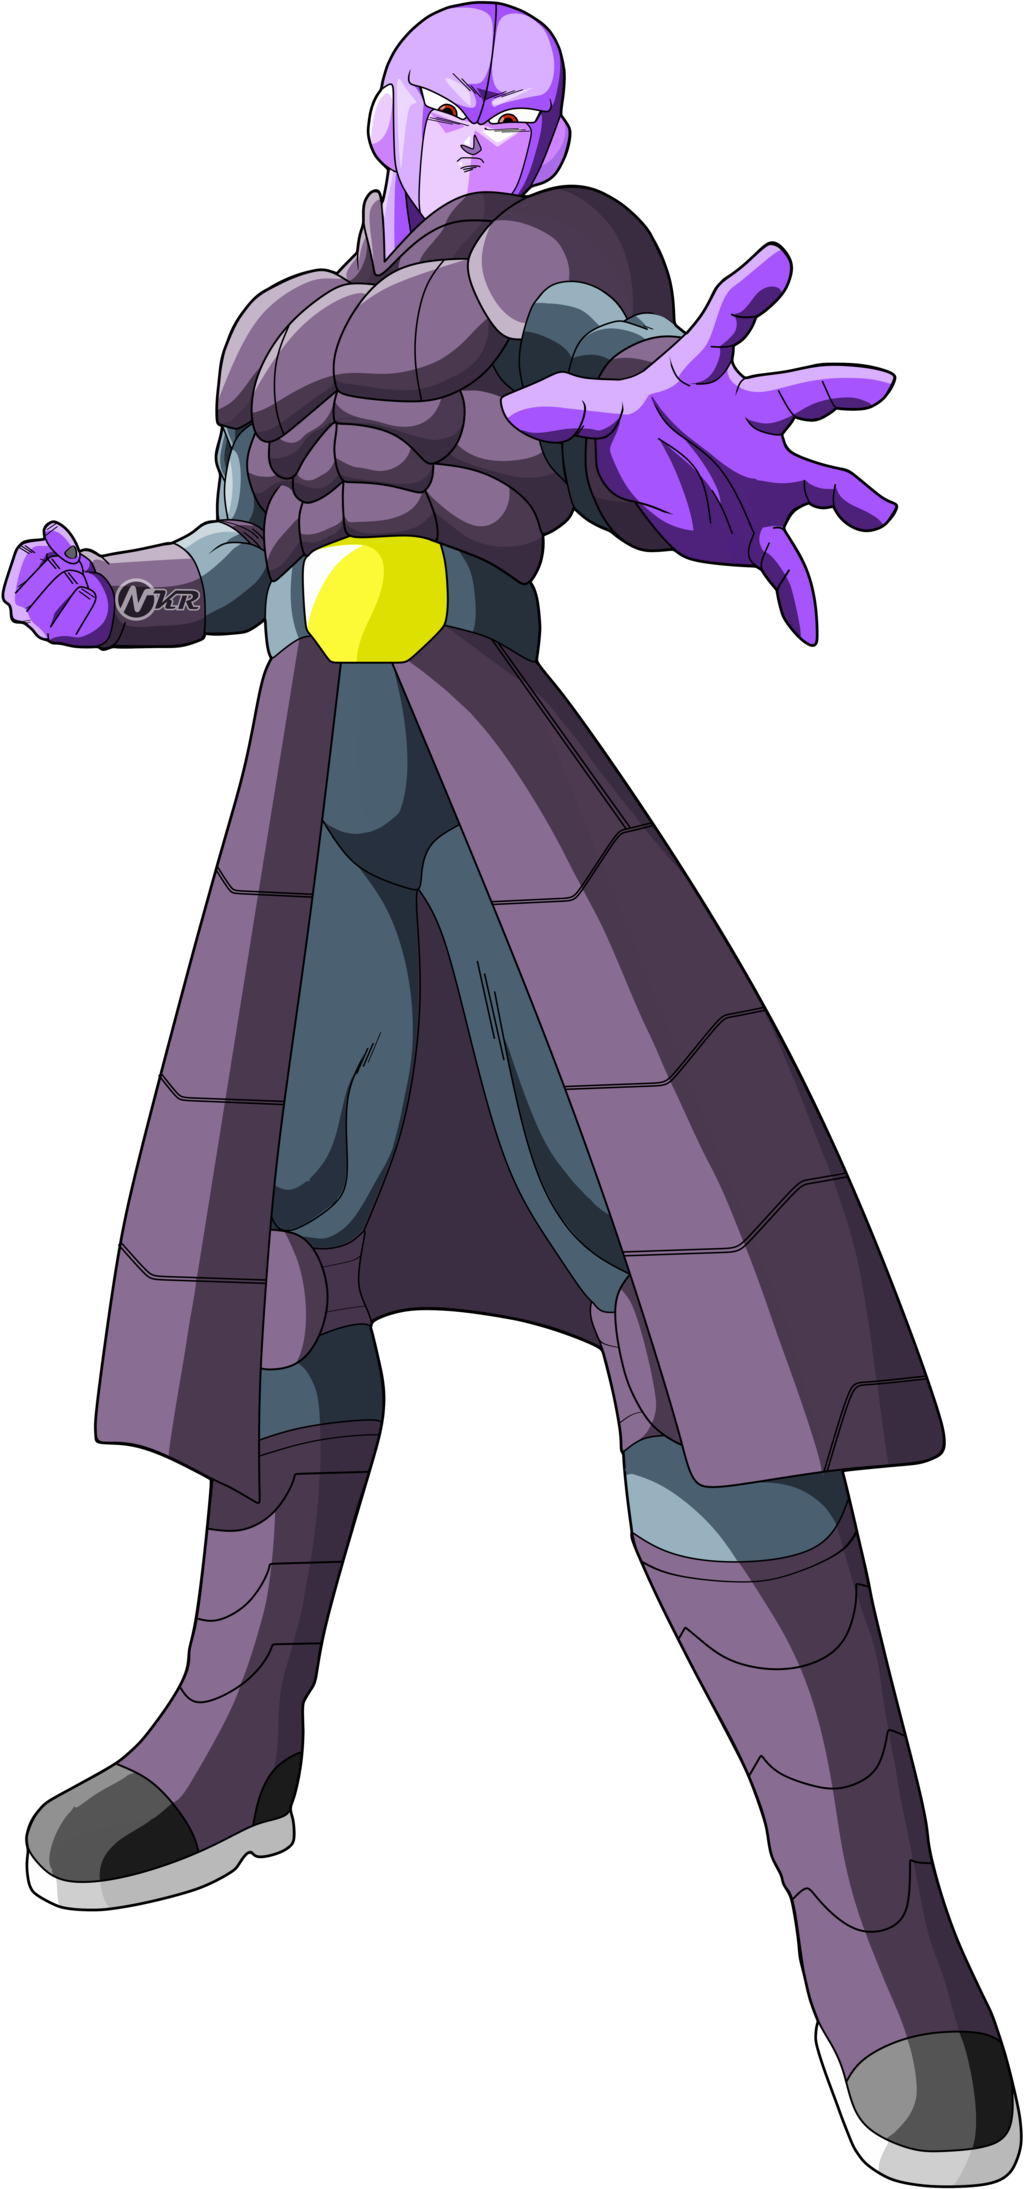 Image   Hit Dragon Ball Super By Naironkr D9Vh3Mn.png | Vs Battles Wiki | Fandom Powered By Wikia - Hit, Transparent background PNG HD thumbnail